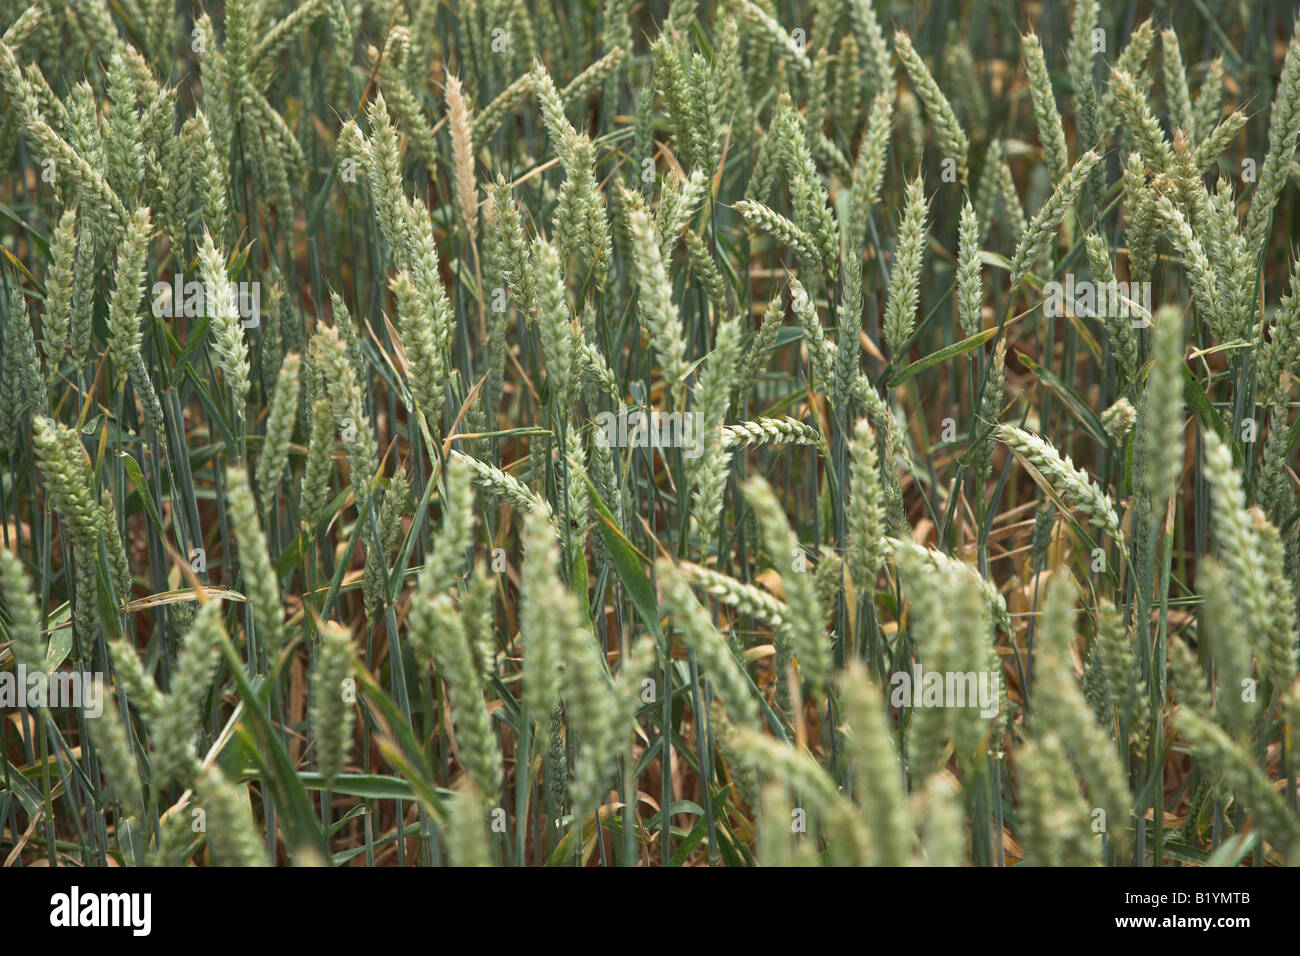 Close up full frame shot of green wheat ears and stalks in field Stock Photo